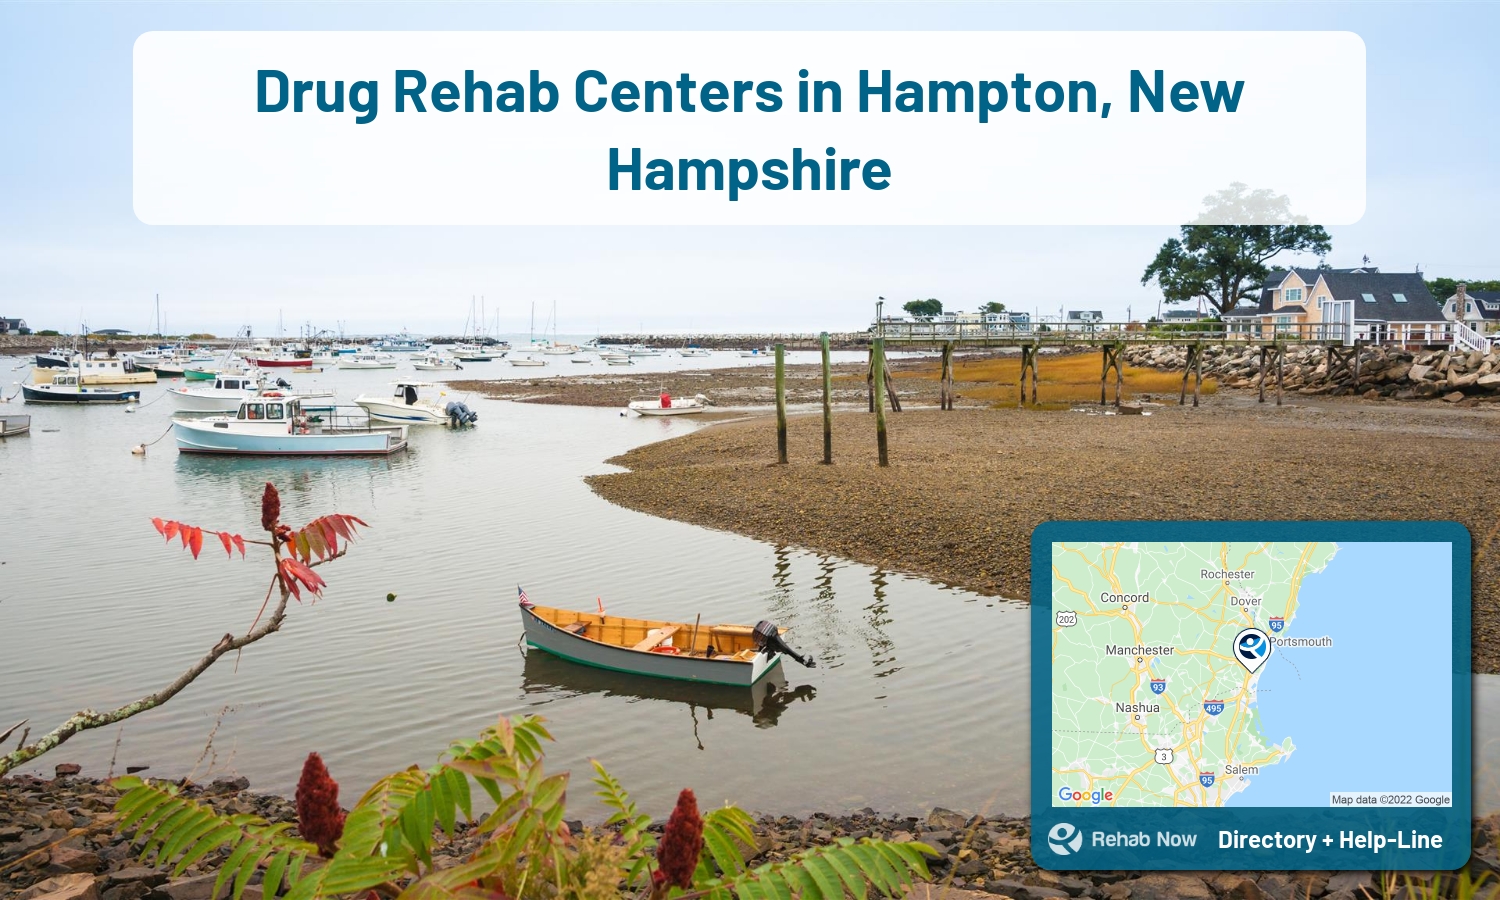 Find drug rehab and alcohol treatment services in Hampton. Our experts help you find a center in Hampton, New Hampshire